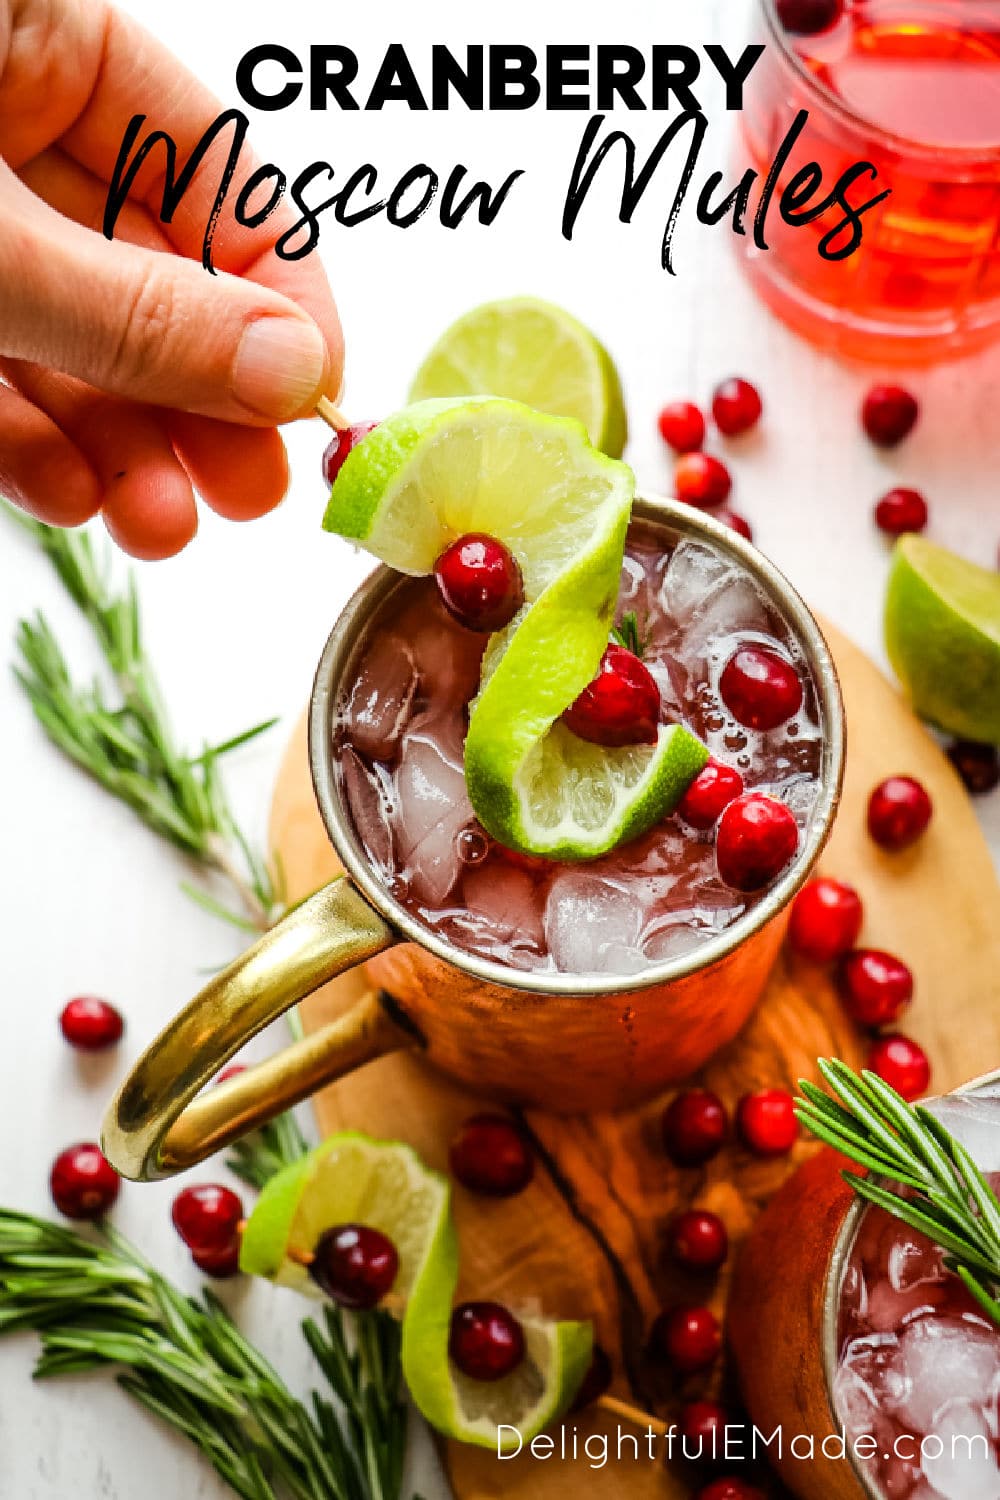 EASY Cranberry Moscow Mules | The perfect Christmas Moscow Mules